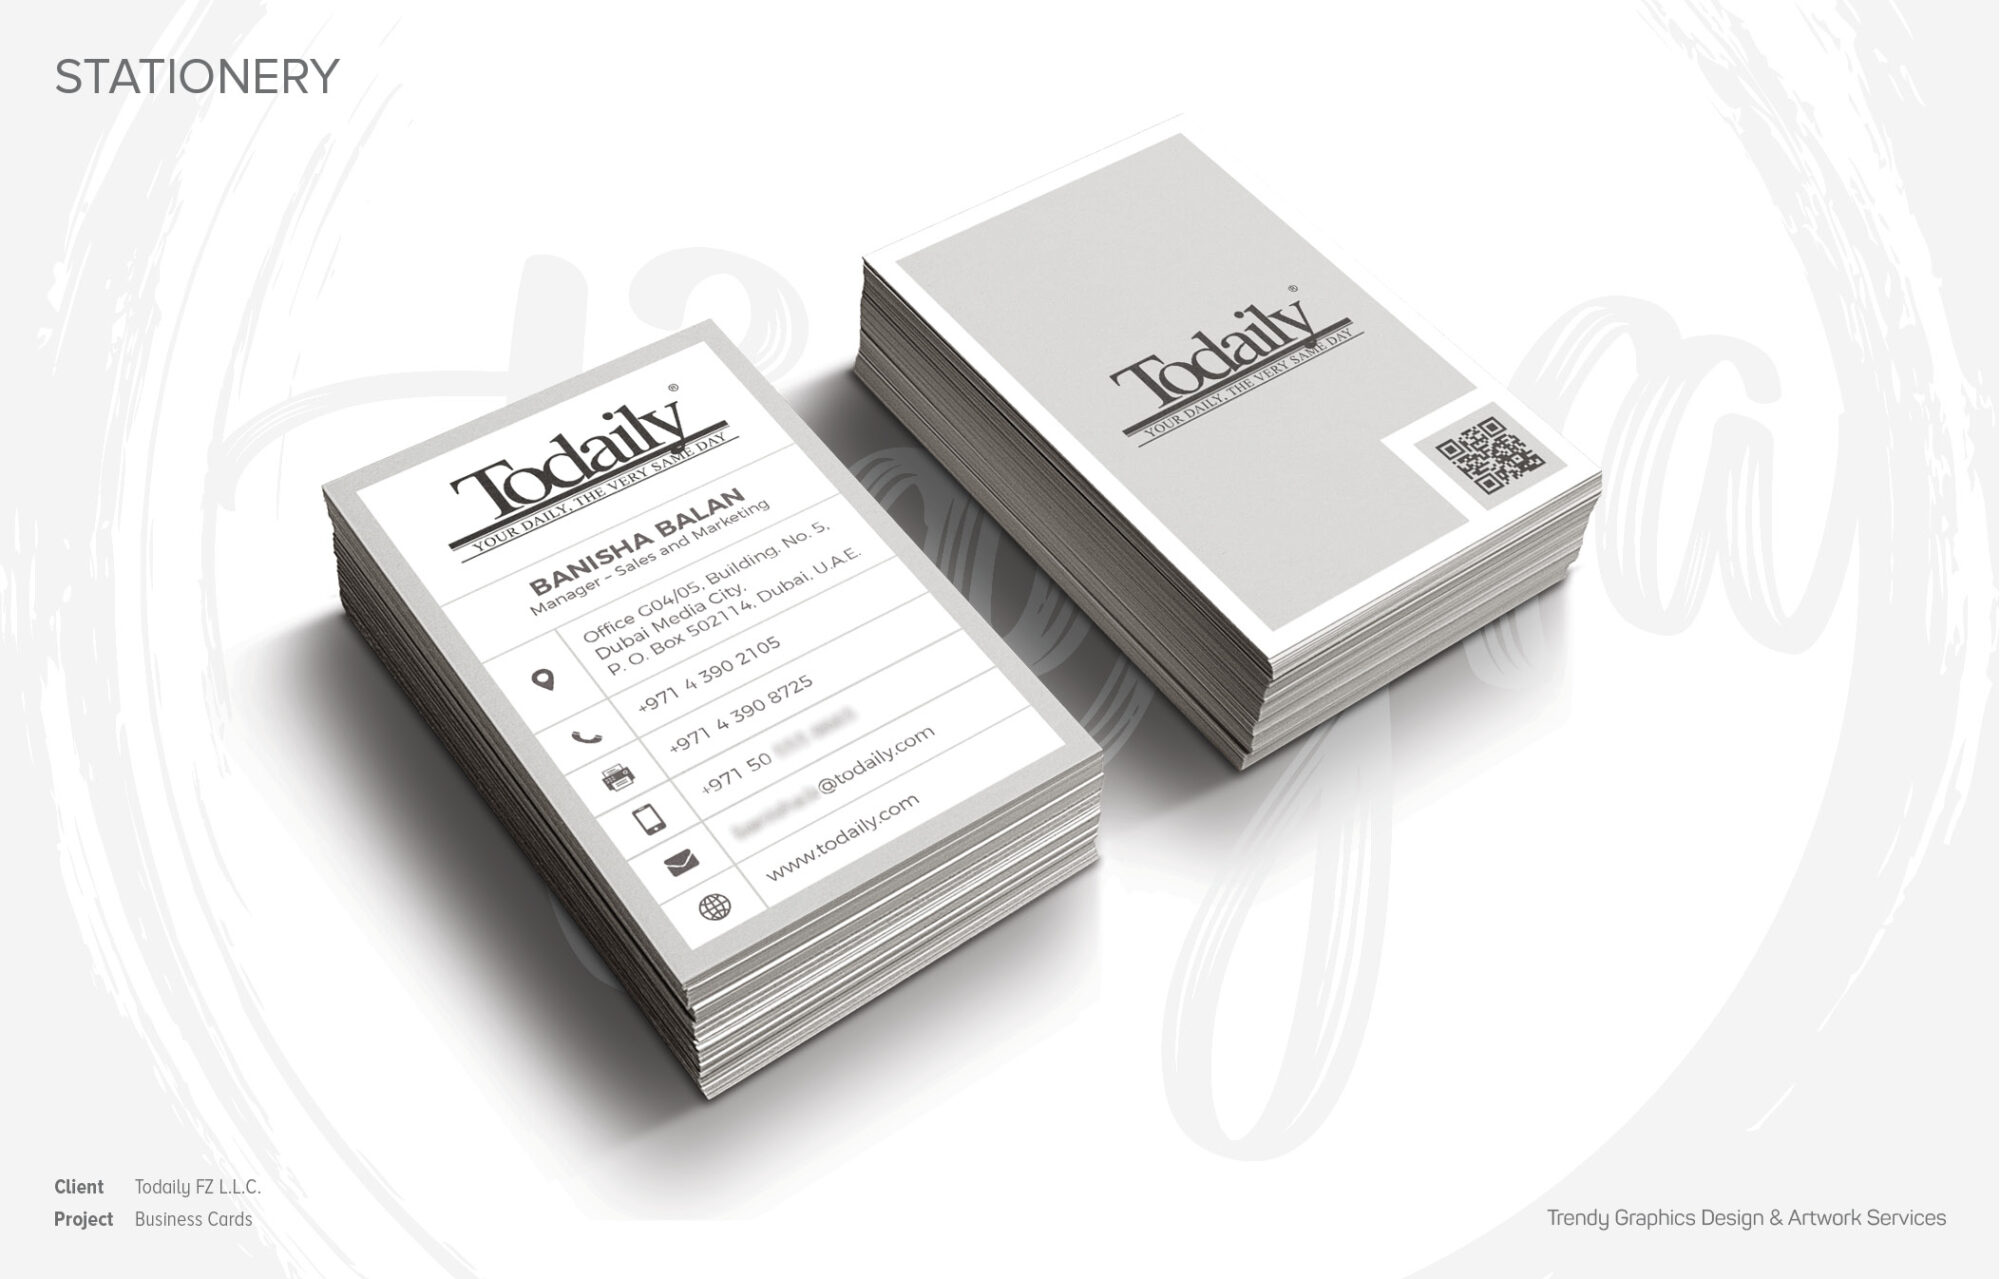 Todaily FZ L.L.C. – Business Cards